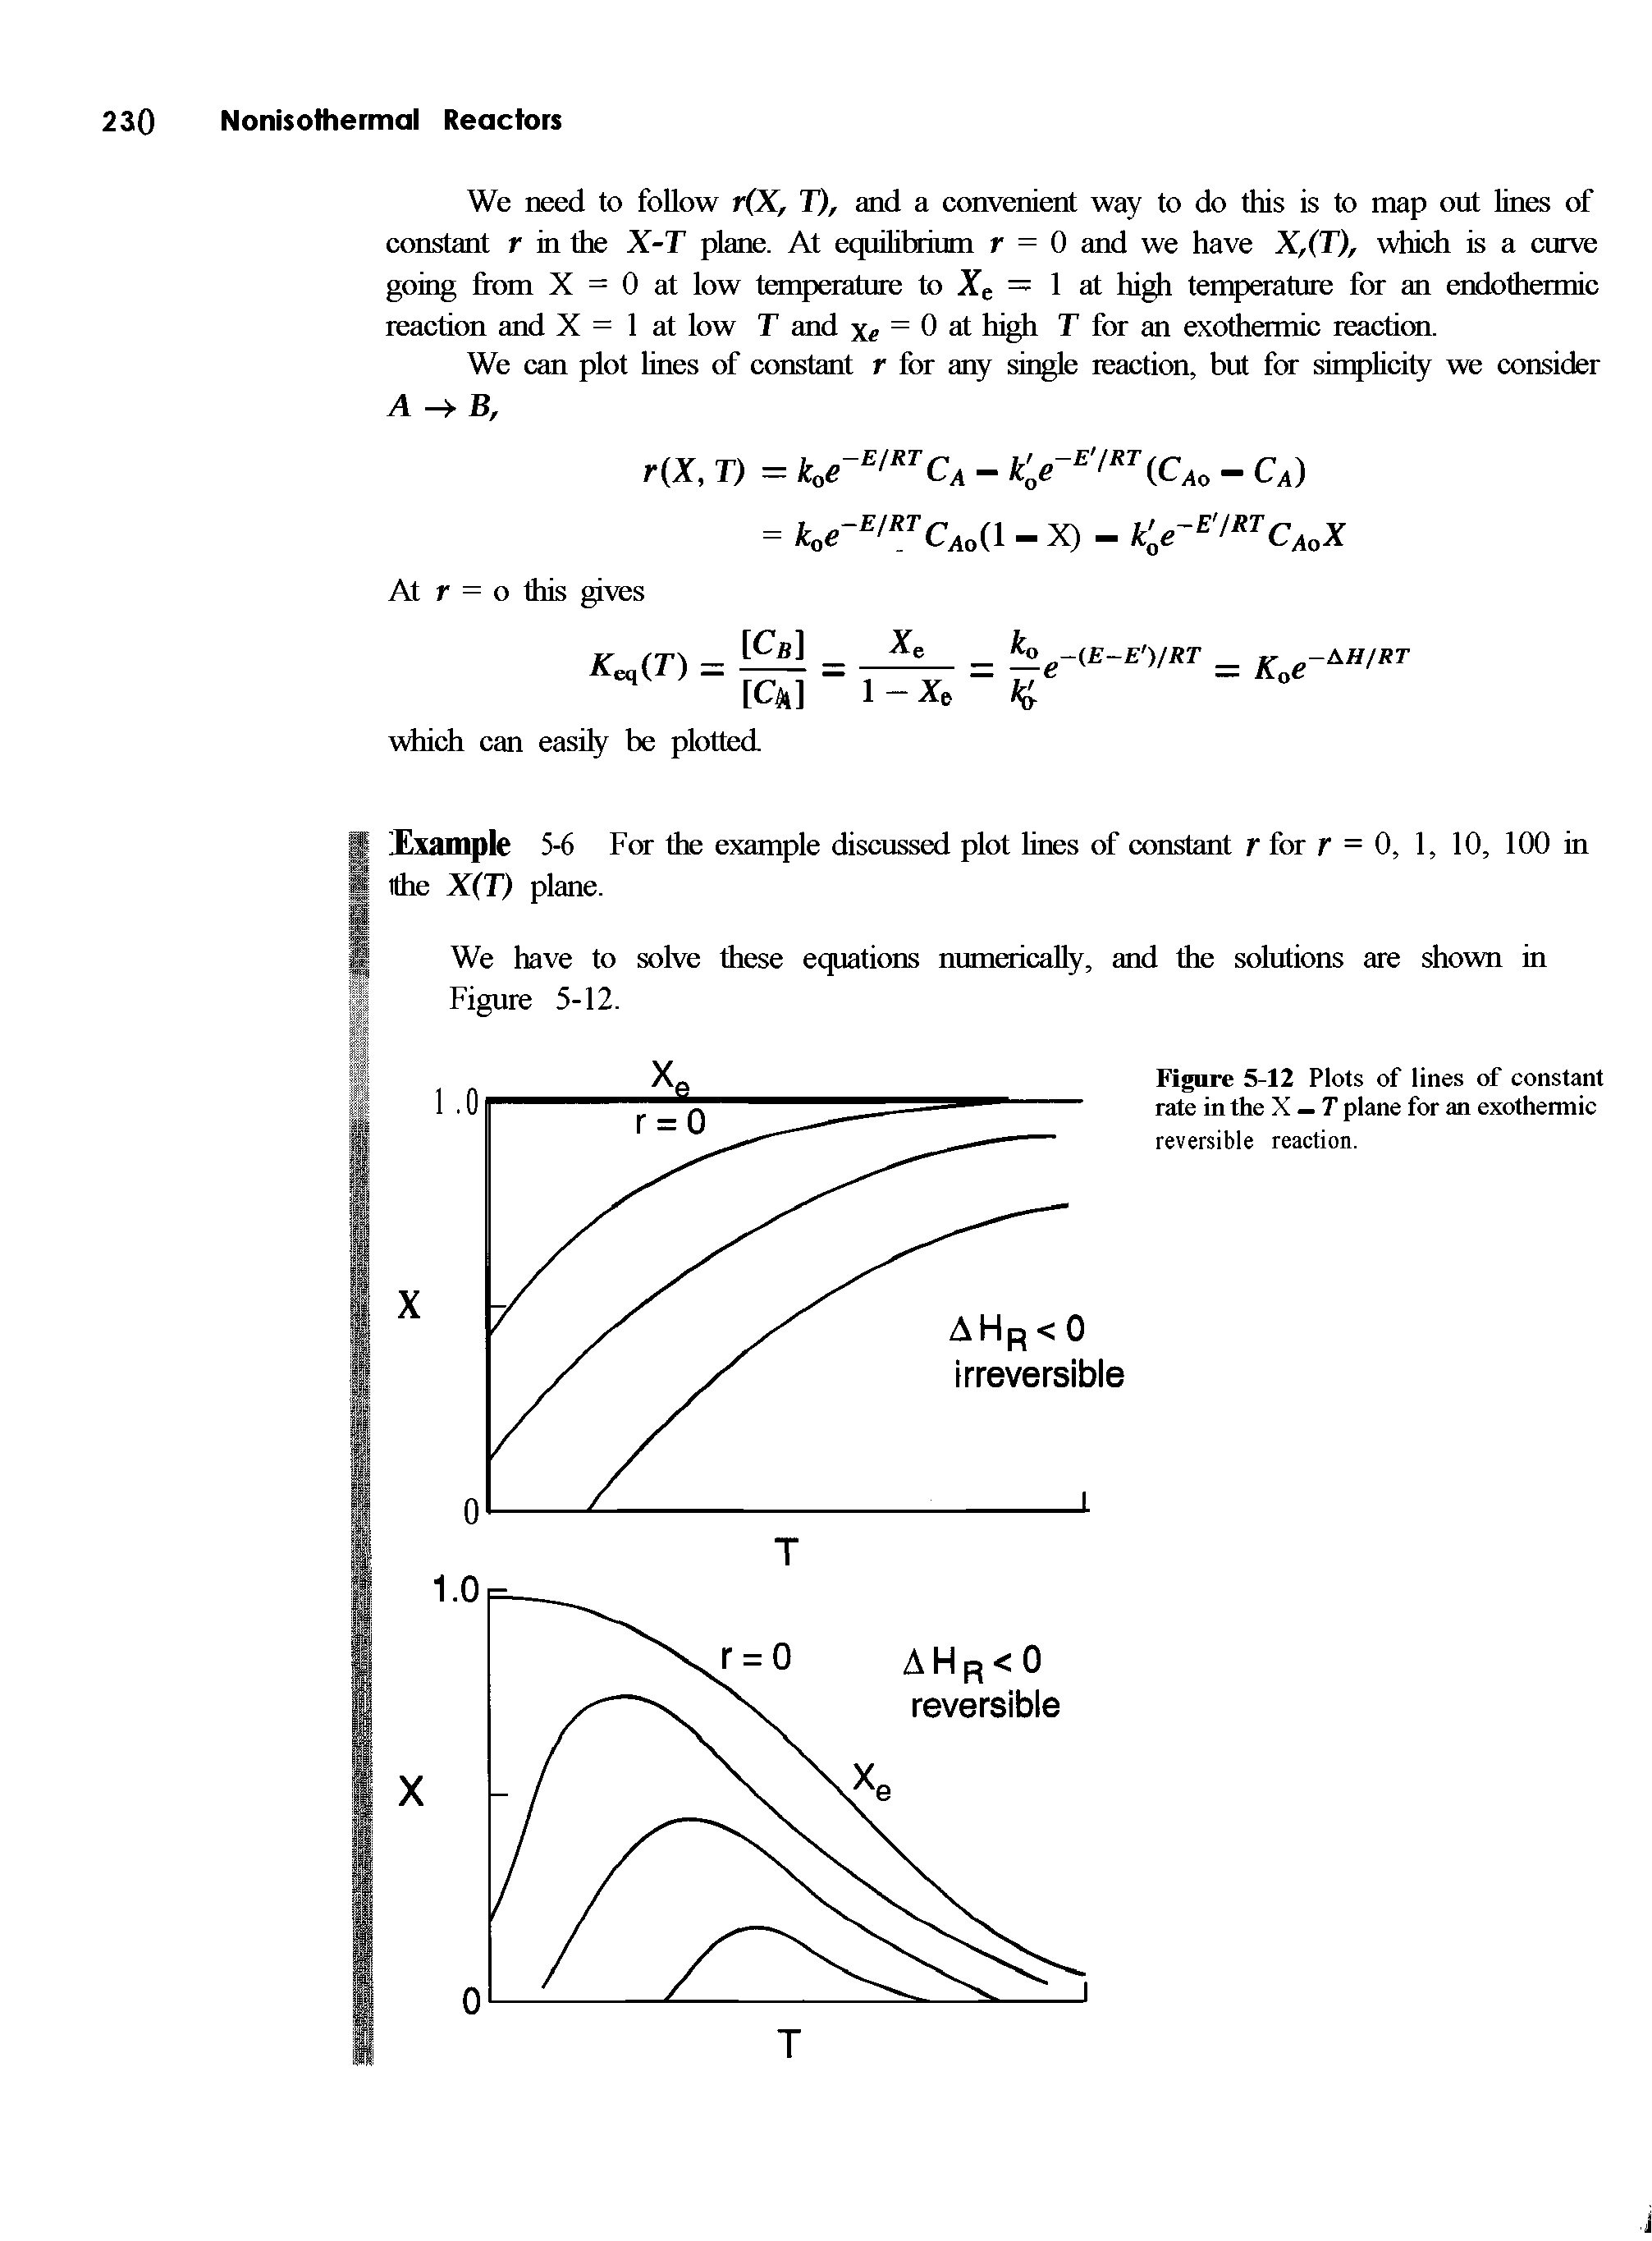 Figure 5-12 Plots of lines of constant rate in the X — T plane for an exothermic reversible reaction.